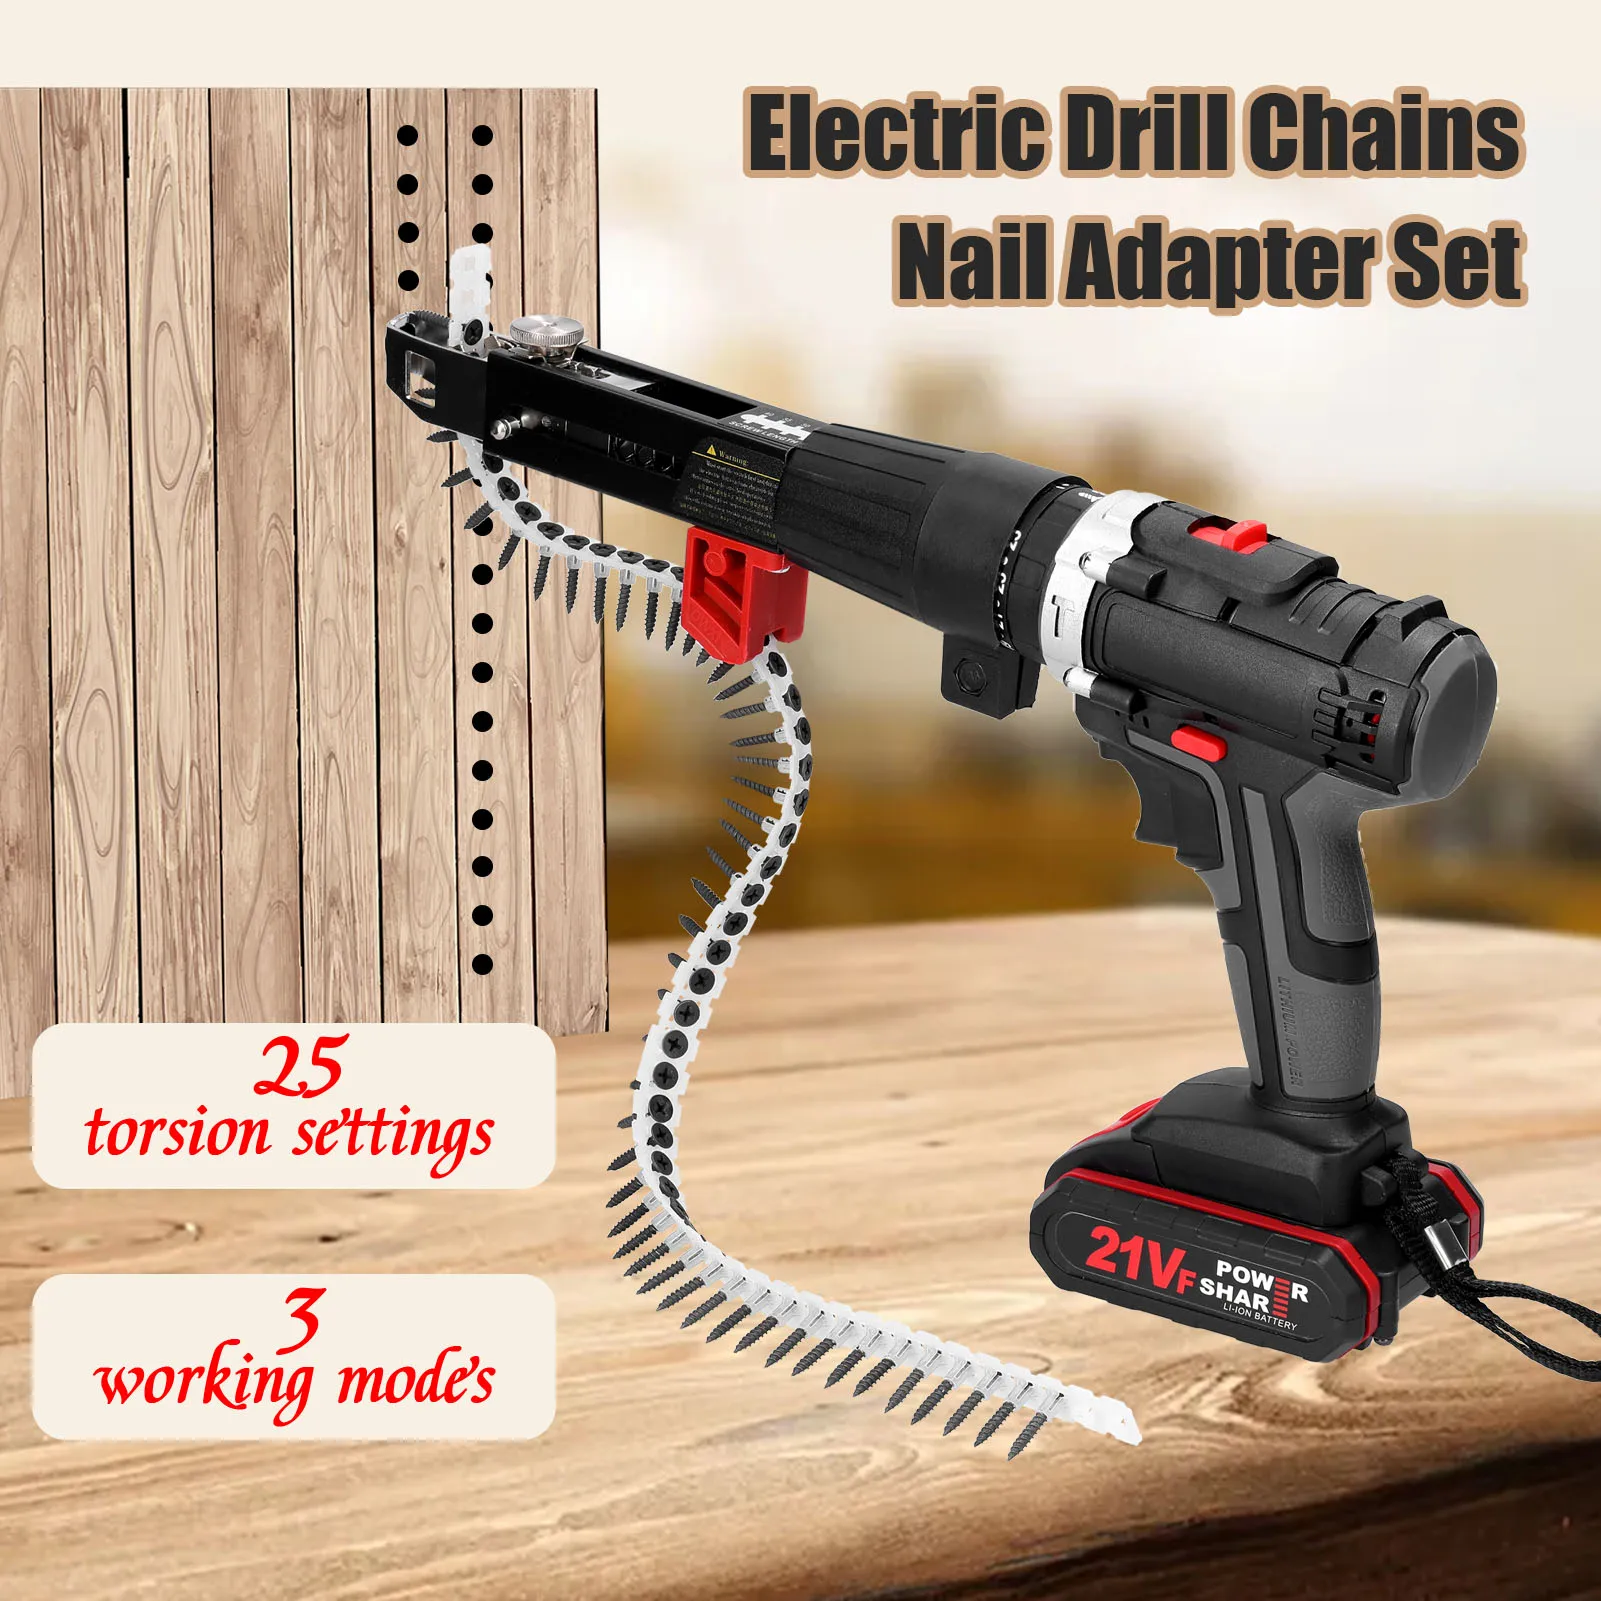 3 in1 Electric Drill Mini Screwdriver Rotation Ways 25 Torques Gears Adjustable Drilling Mchine with Chains Nail Adapter | Инструменты